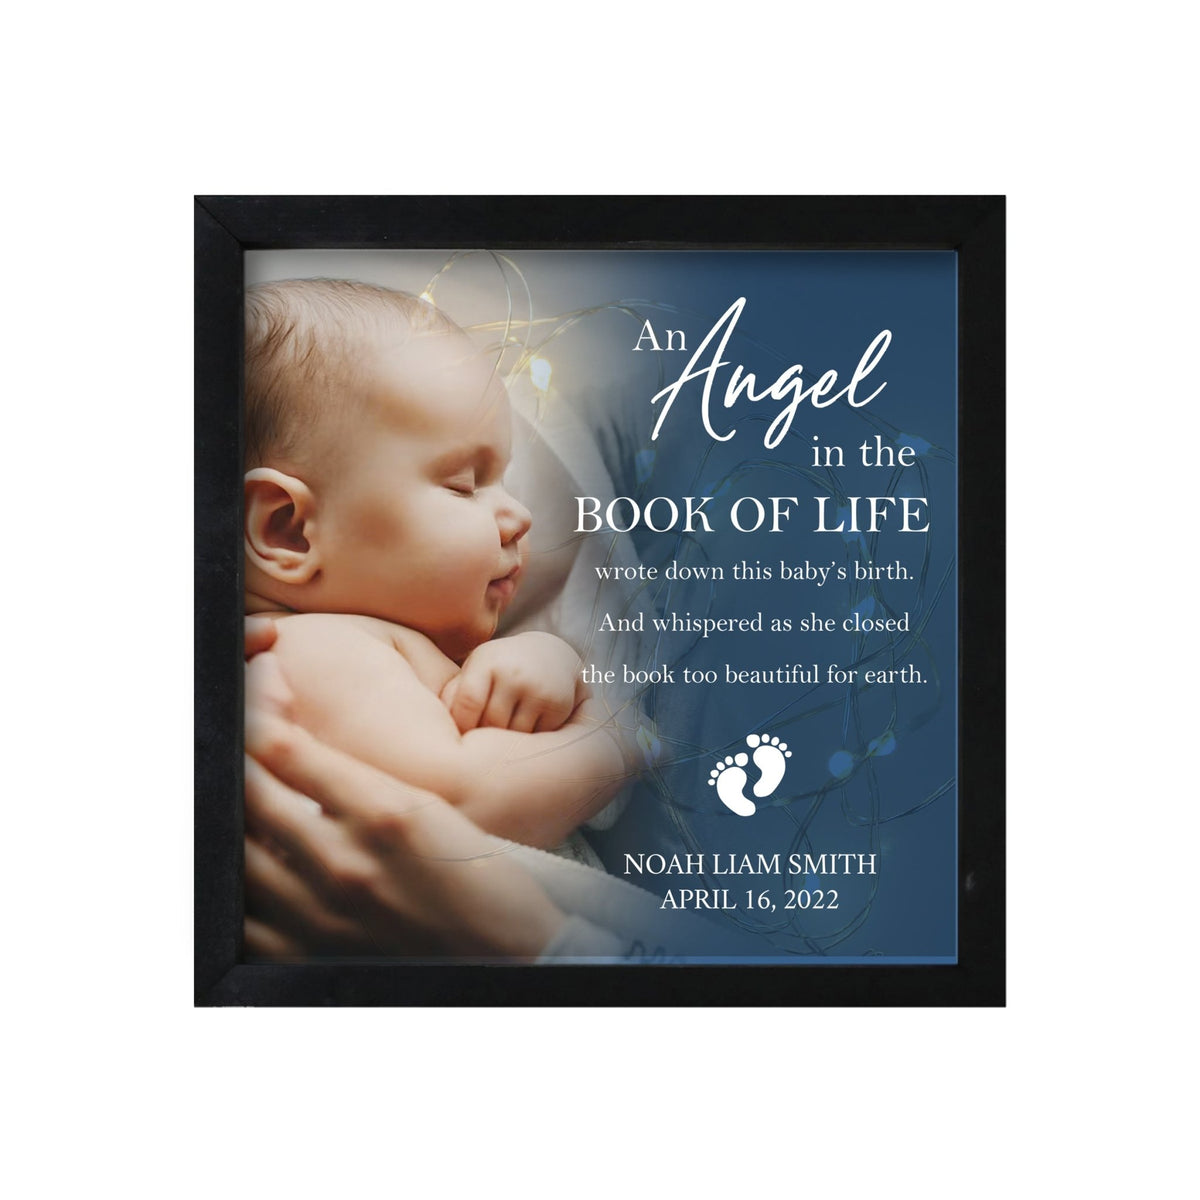 Personalized Memorial Black Framed Shadow Box With Lights Sympathy Gift &amp; Wall Décor - An Angel In The Book - LifeSong Milestones